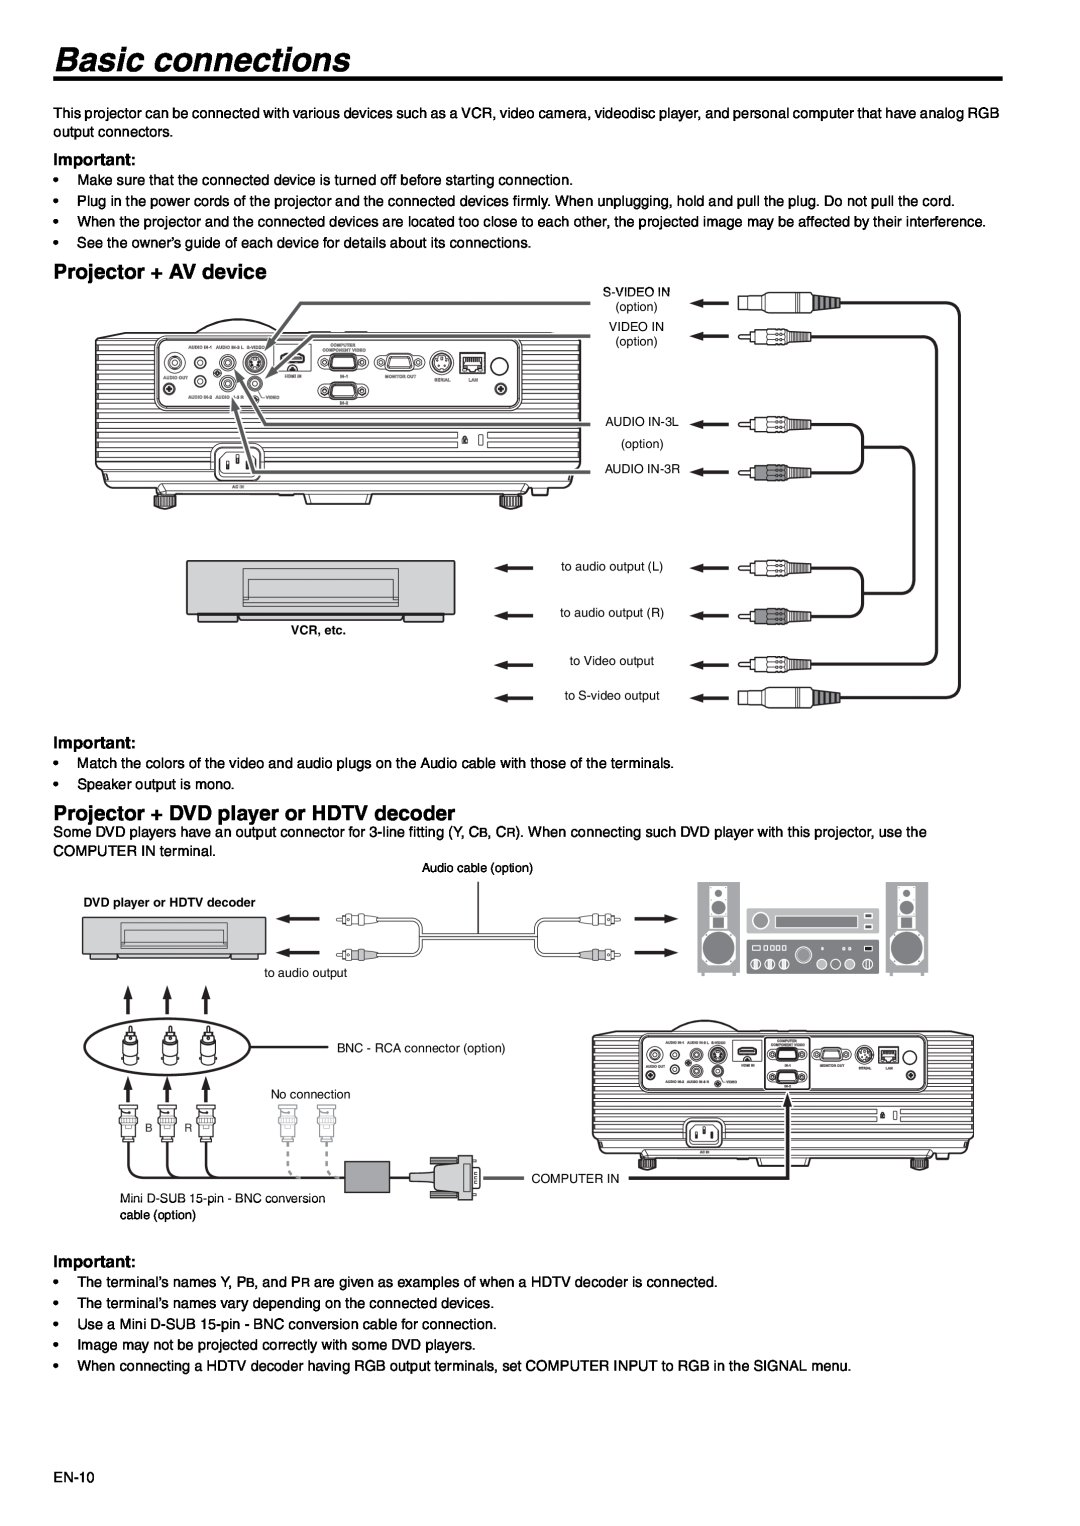 Mitsubishi Electronics XD280U-G, XD250U-G Basic connections, Projector + AV device, Projector + DVD player or HDTV decoder 